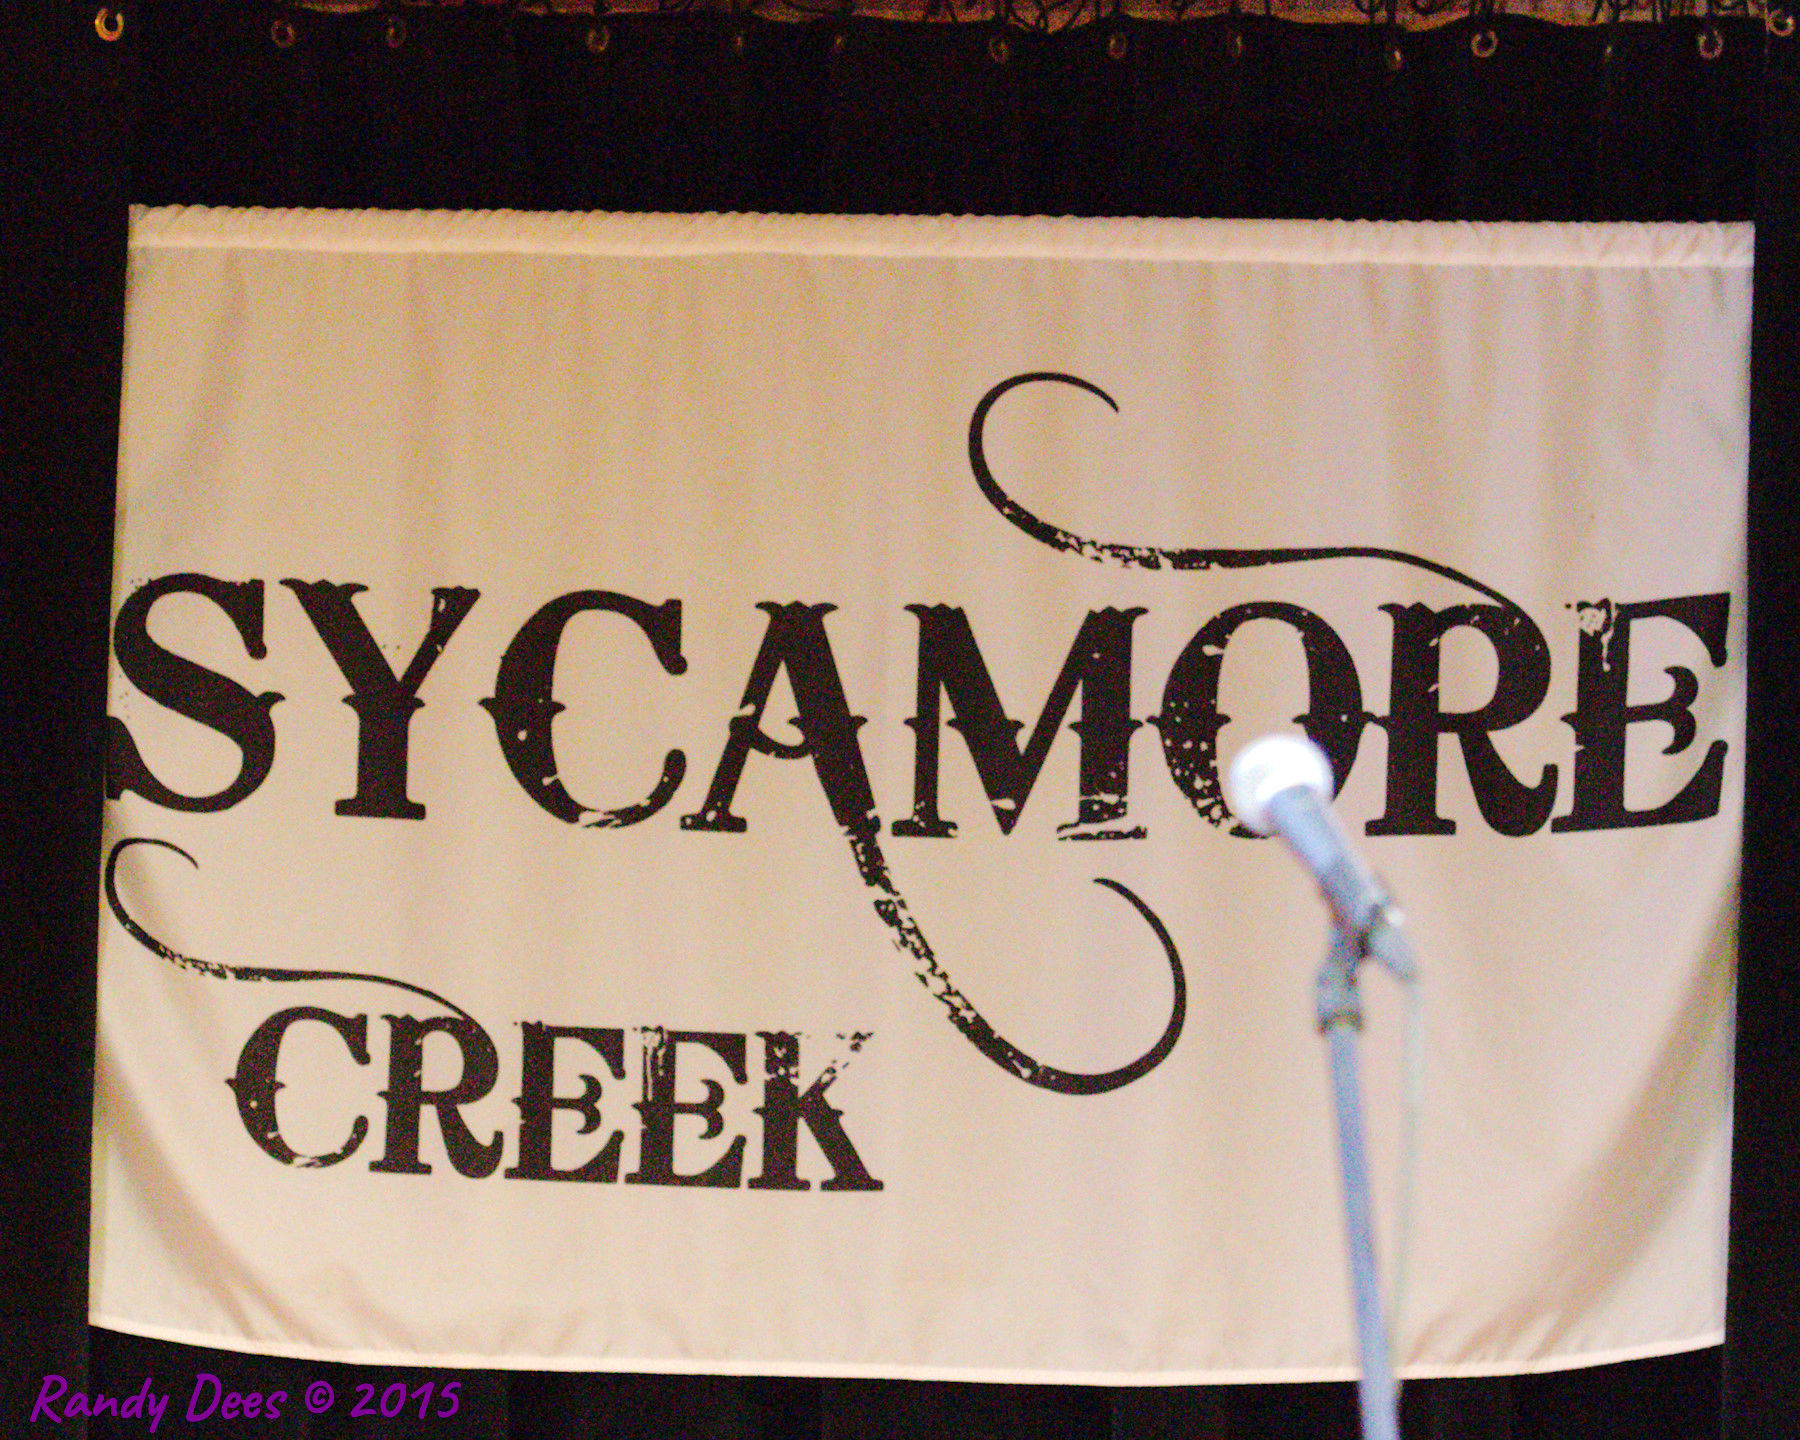 Sycamore Creek House Concerts